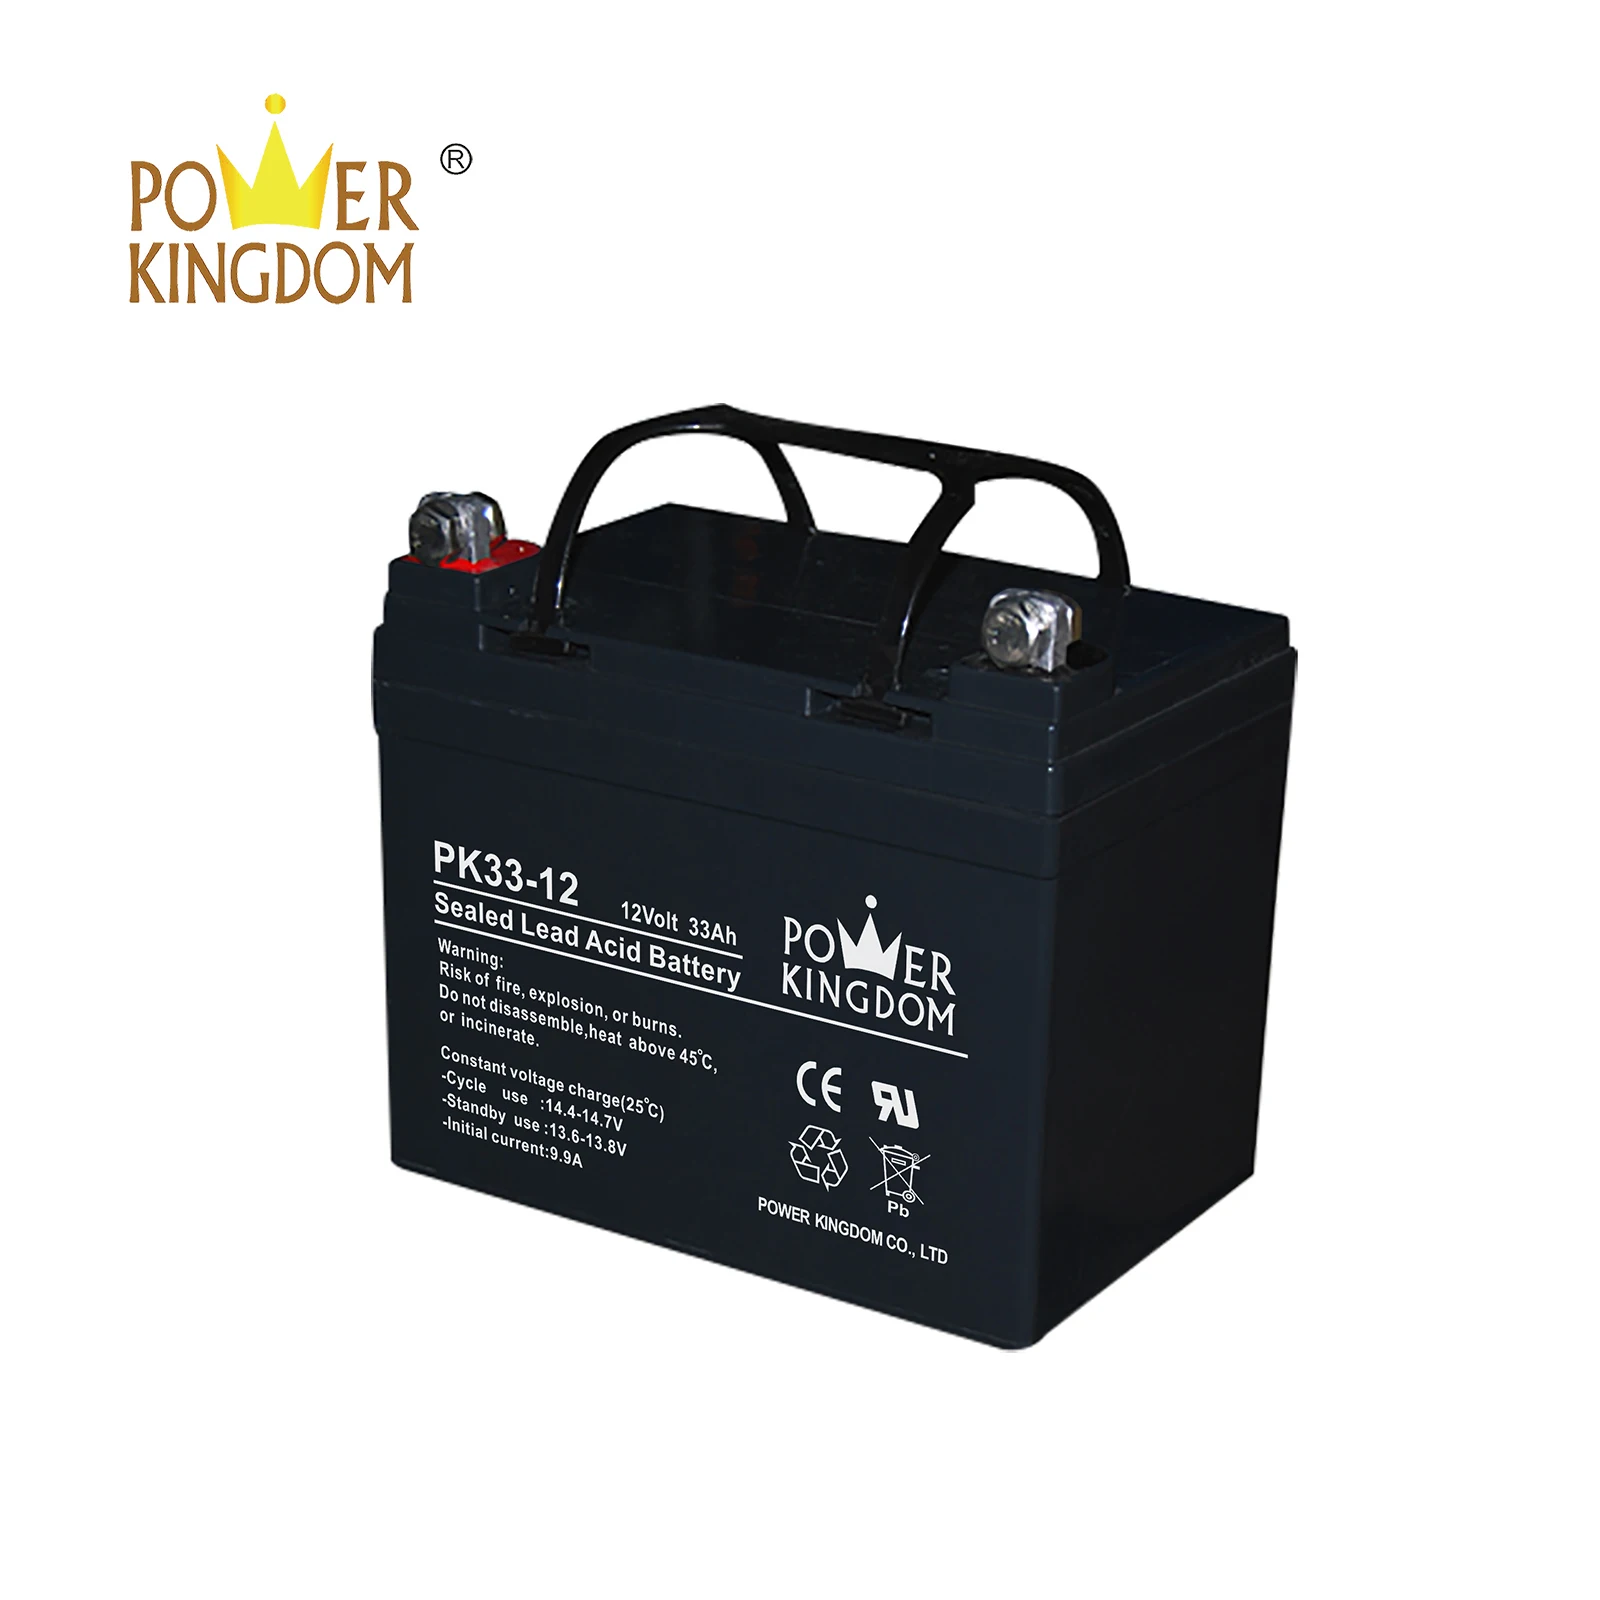 Power Kingdom Top are optima batteries gel company solar and wind power system-2